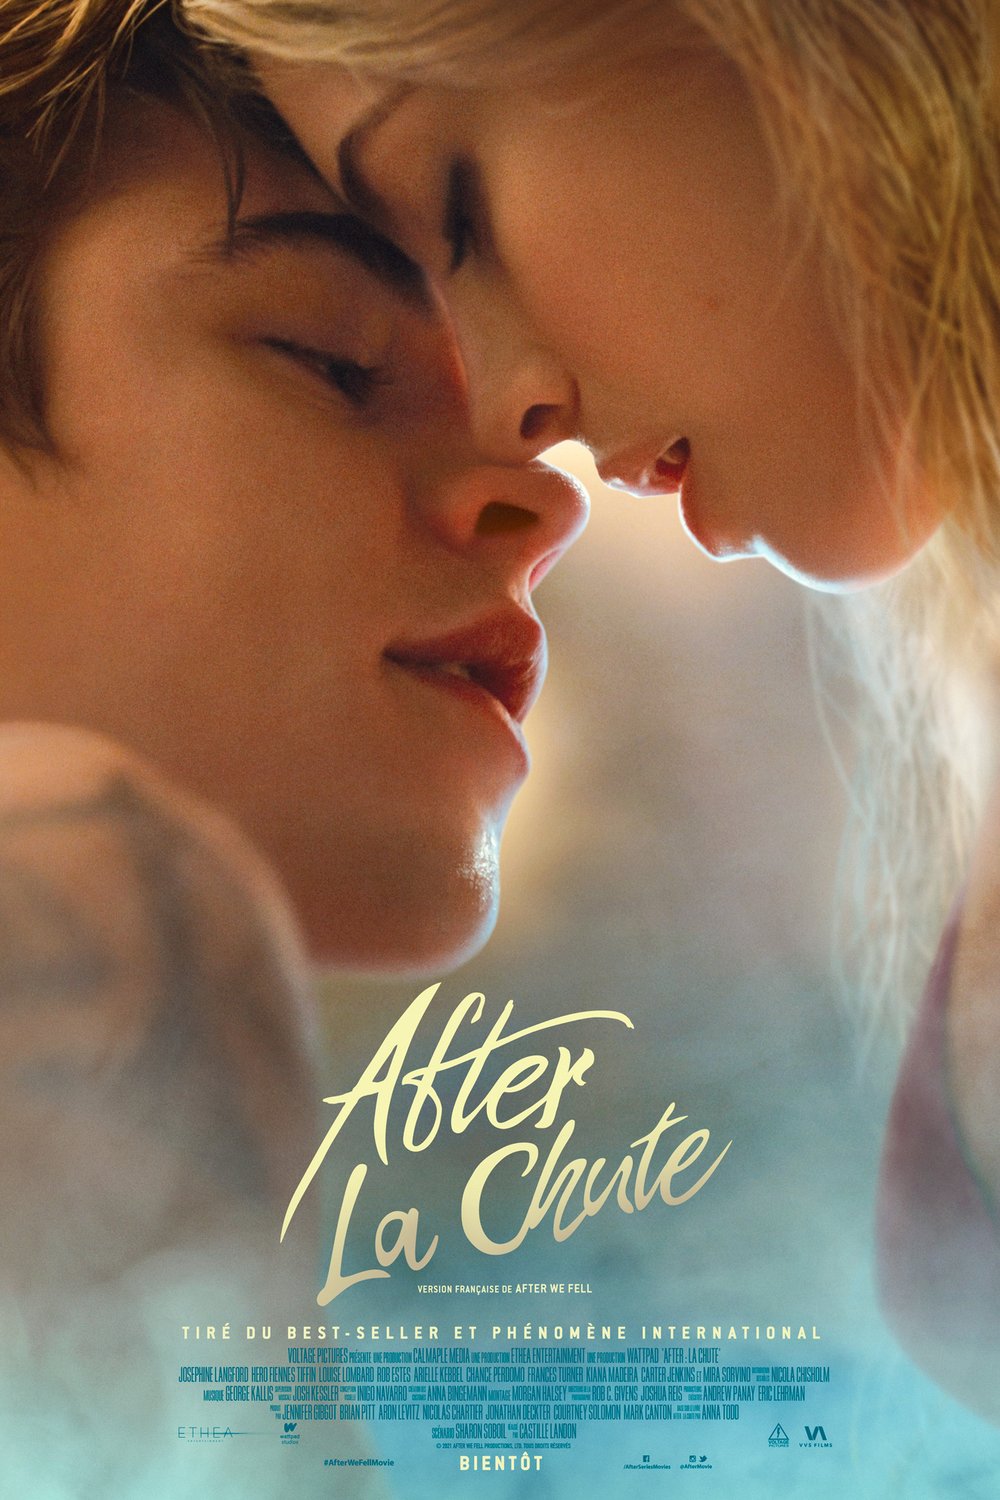 Poster of the movie After: La chute